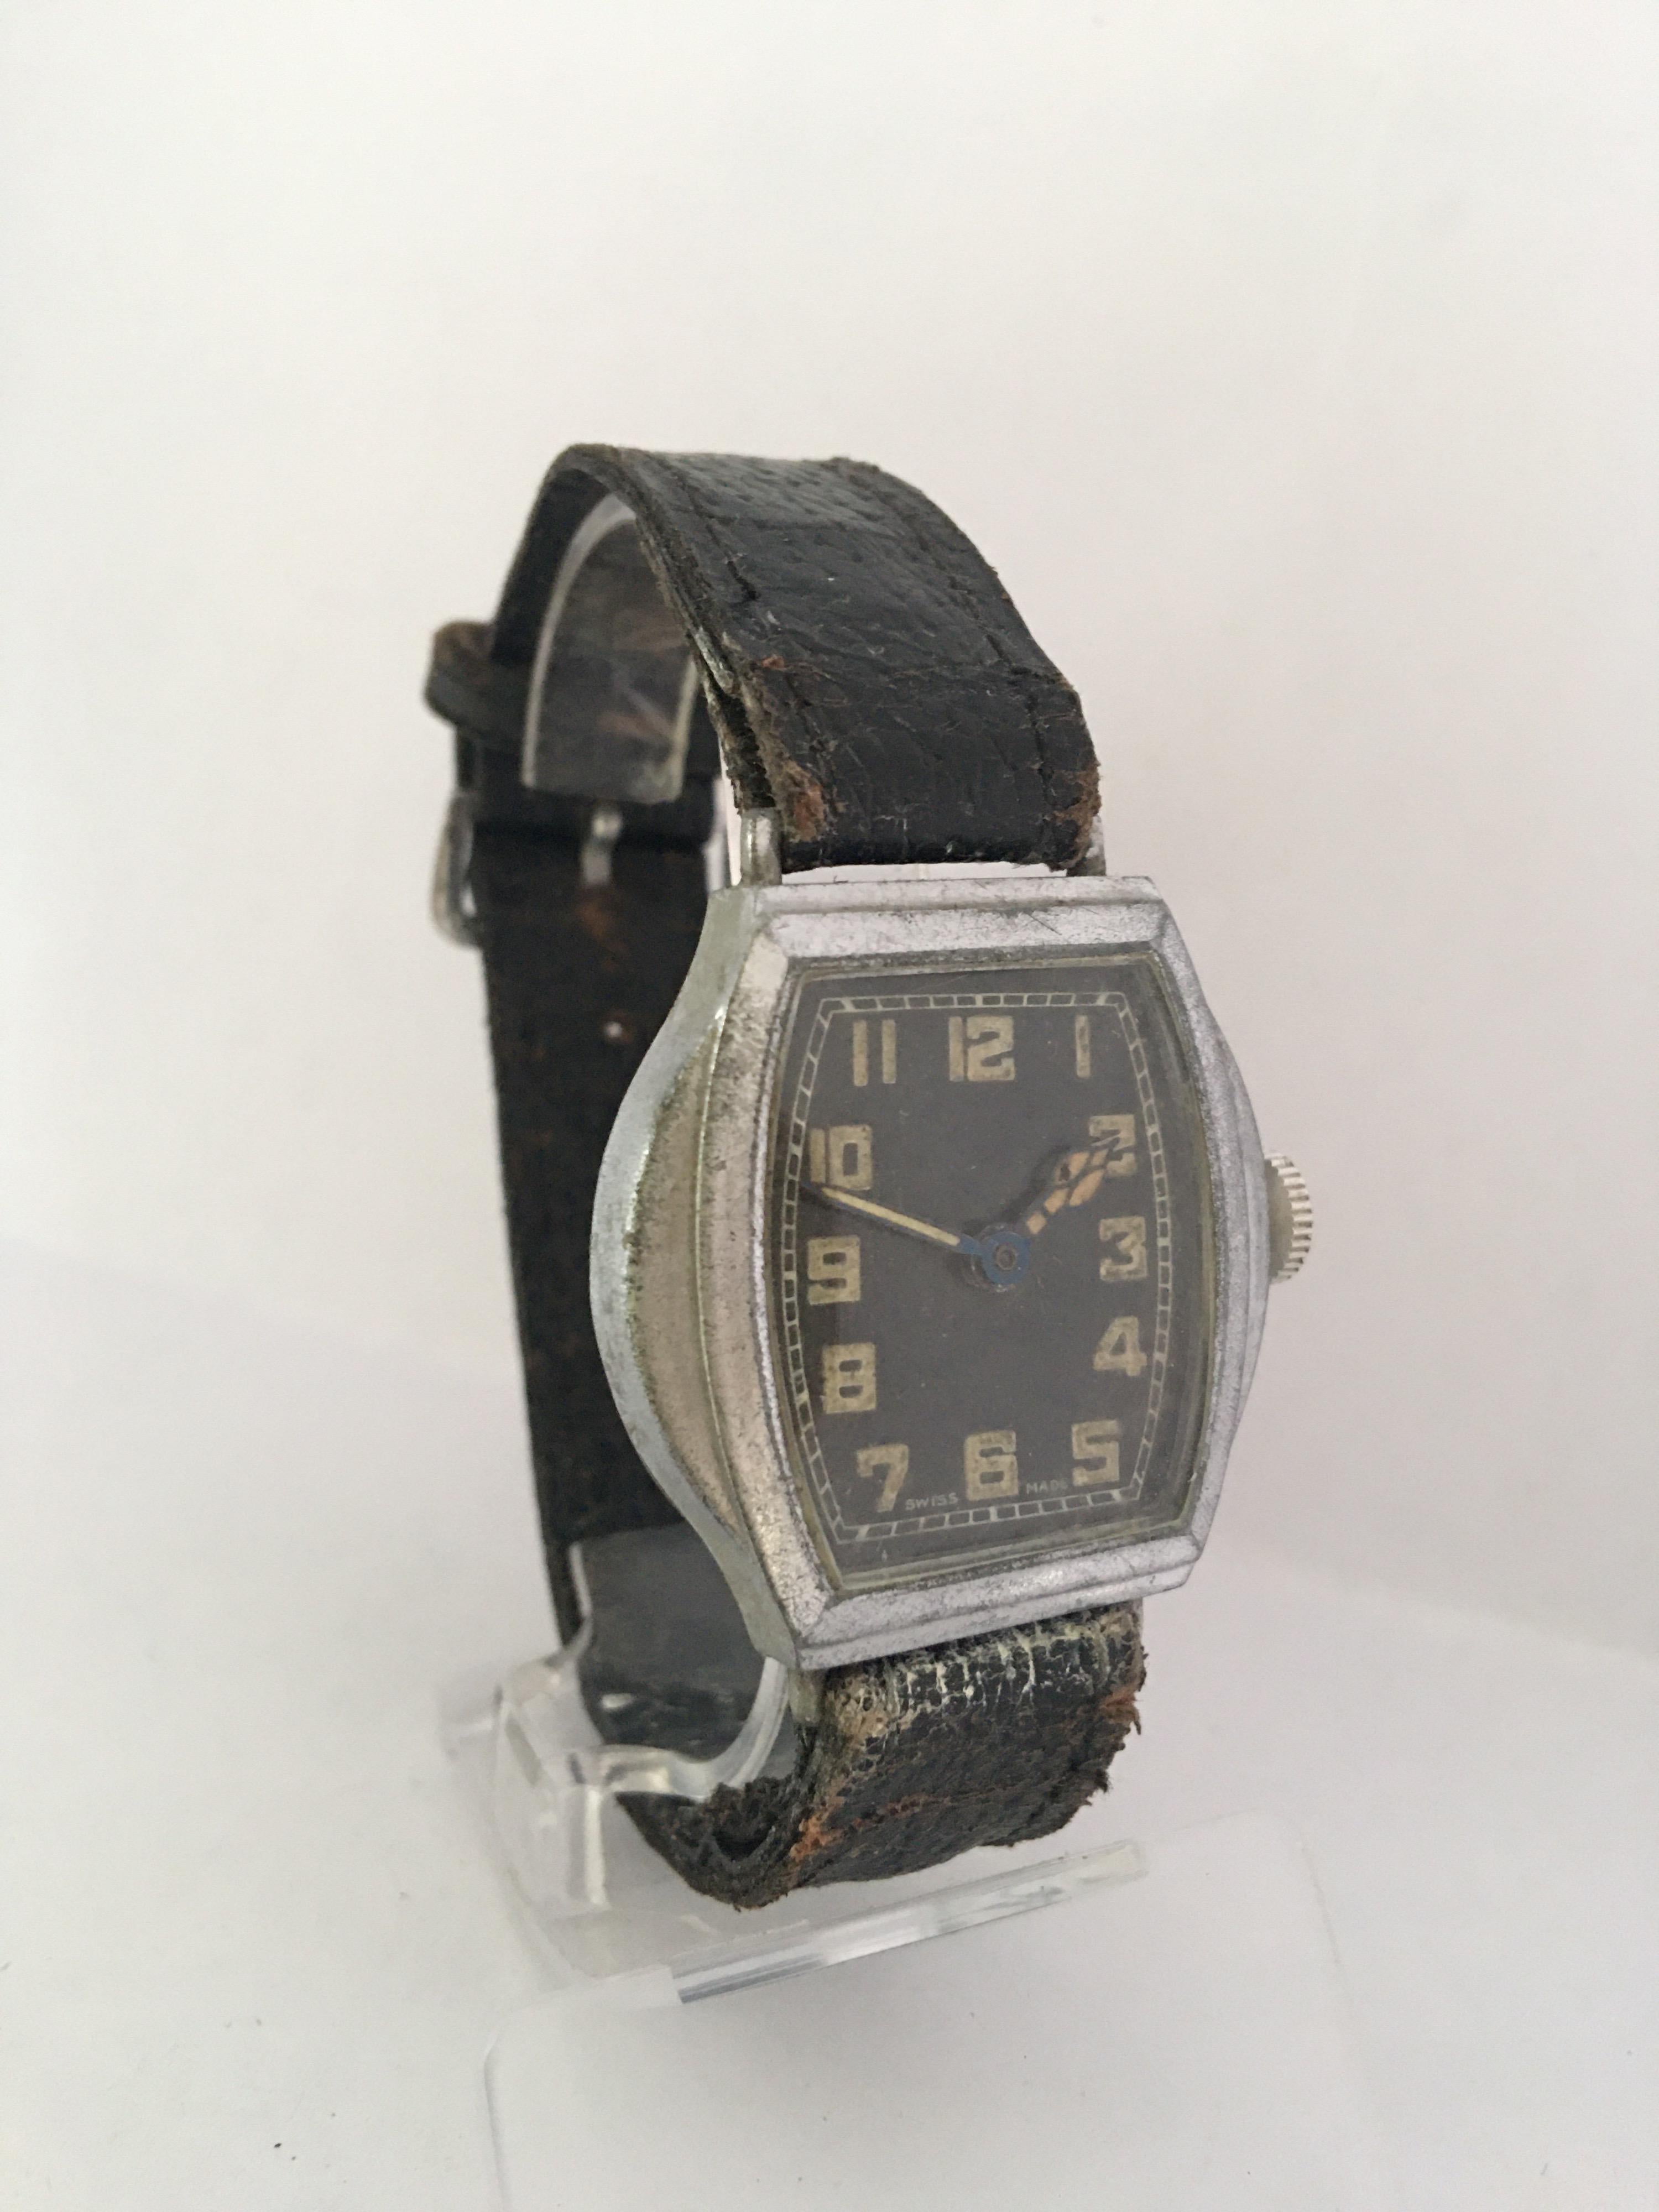 This pre-owned vintage hand winding watch is working but it keep stopping. It probably need a service. Visible signs of ageing and wear with light marks on the glass . The chrome plated metal base case has aged and is tarnished as shown. An old